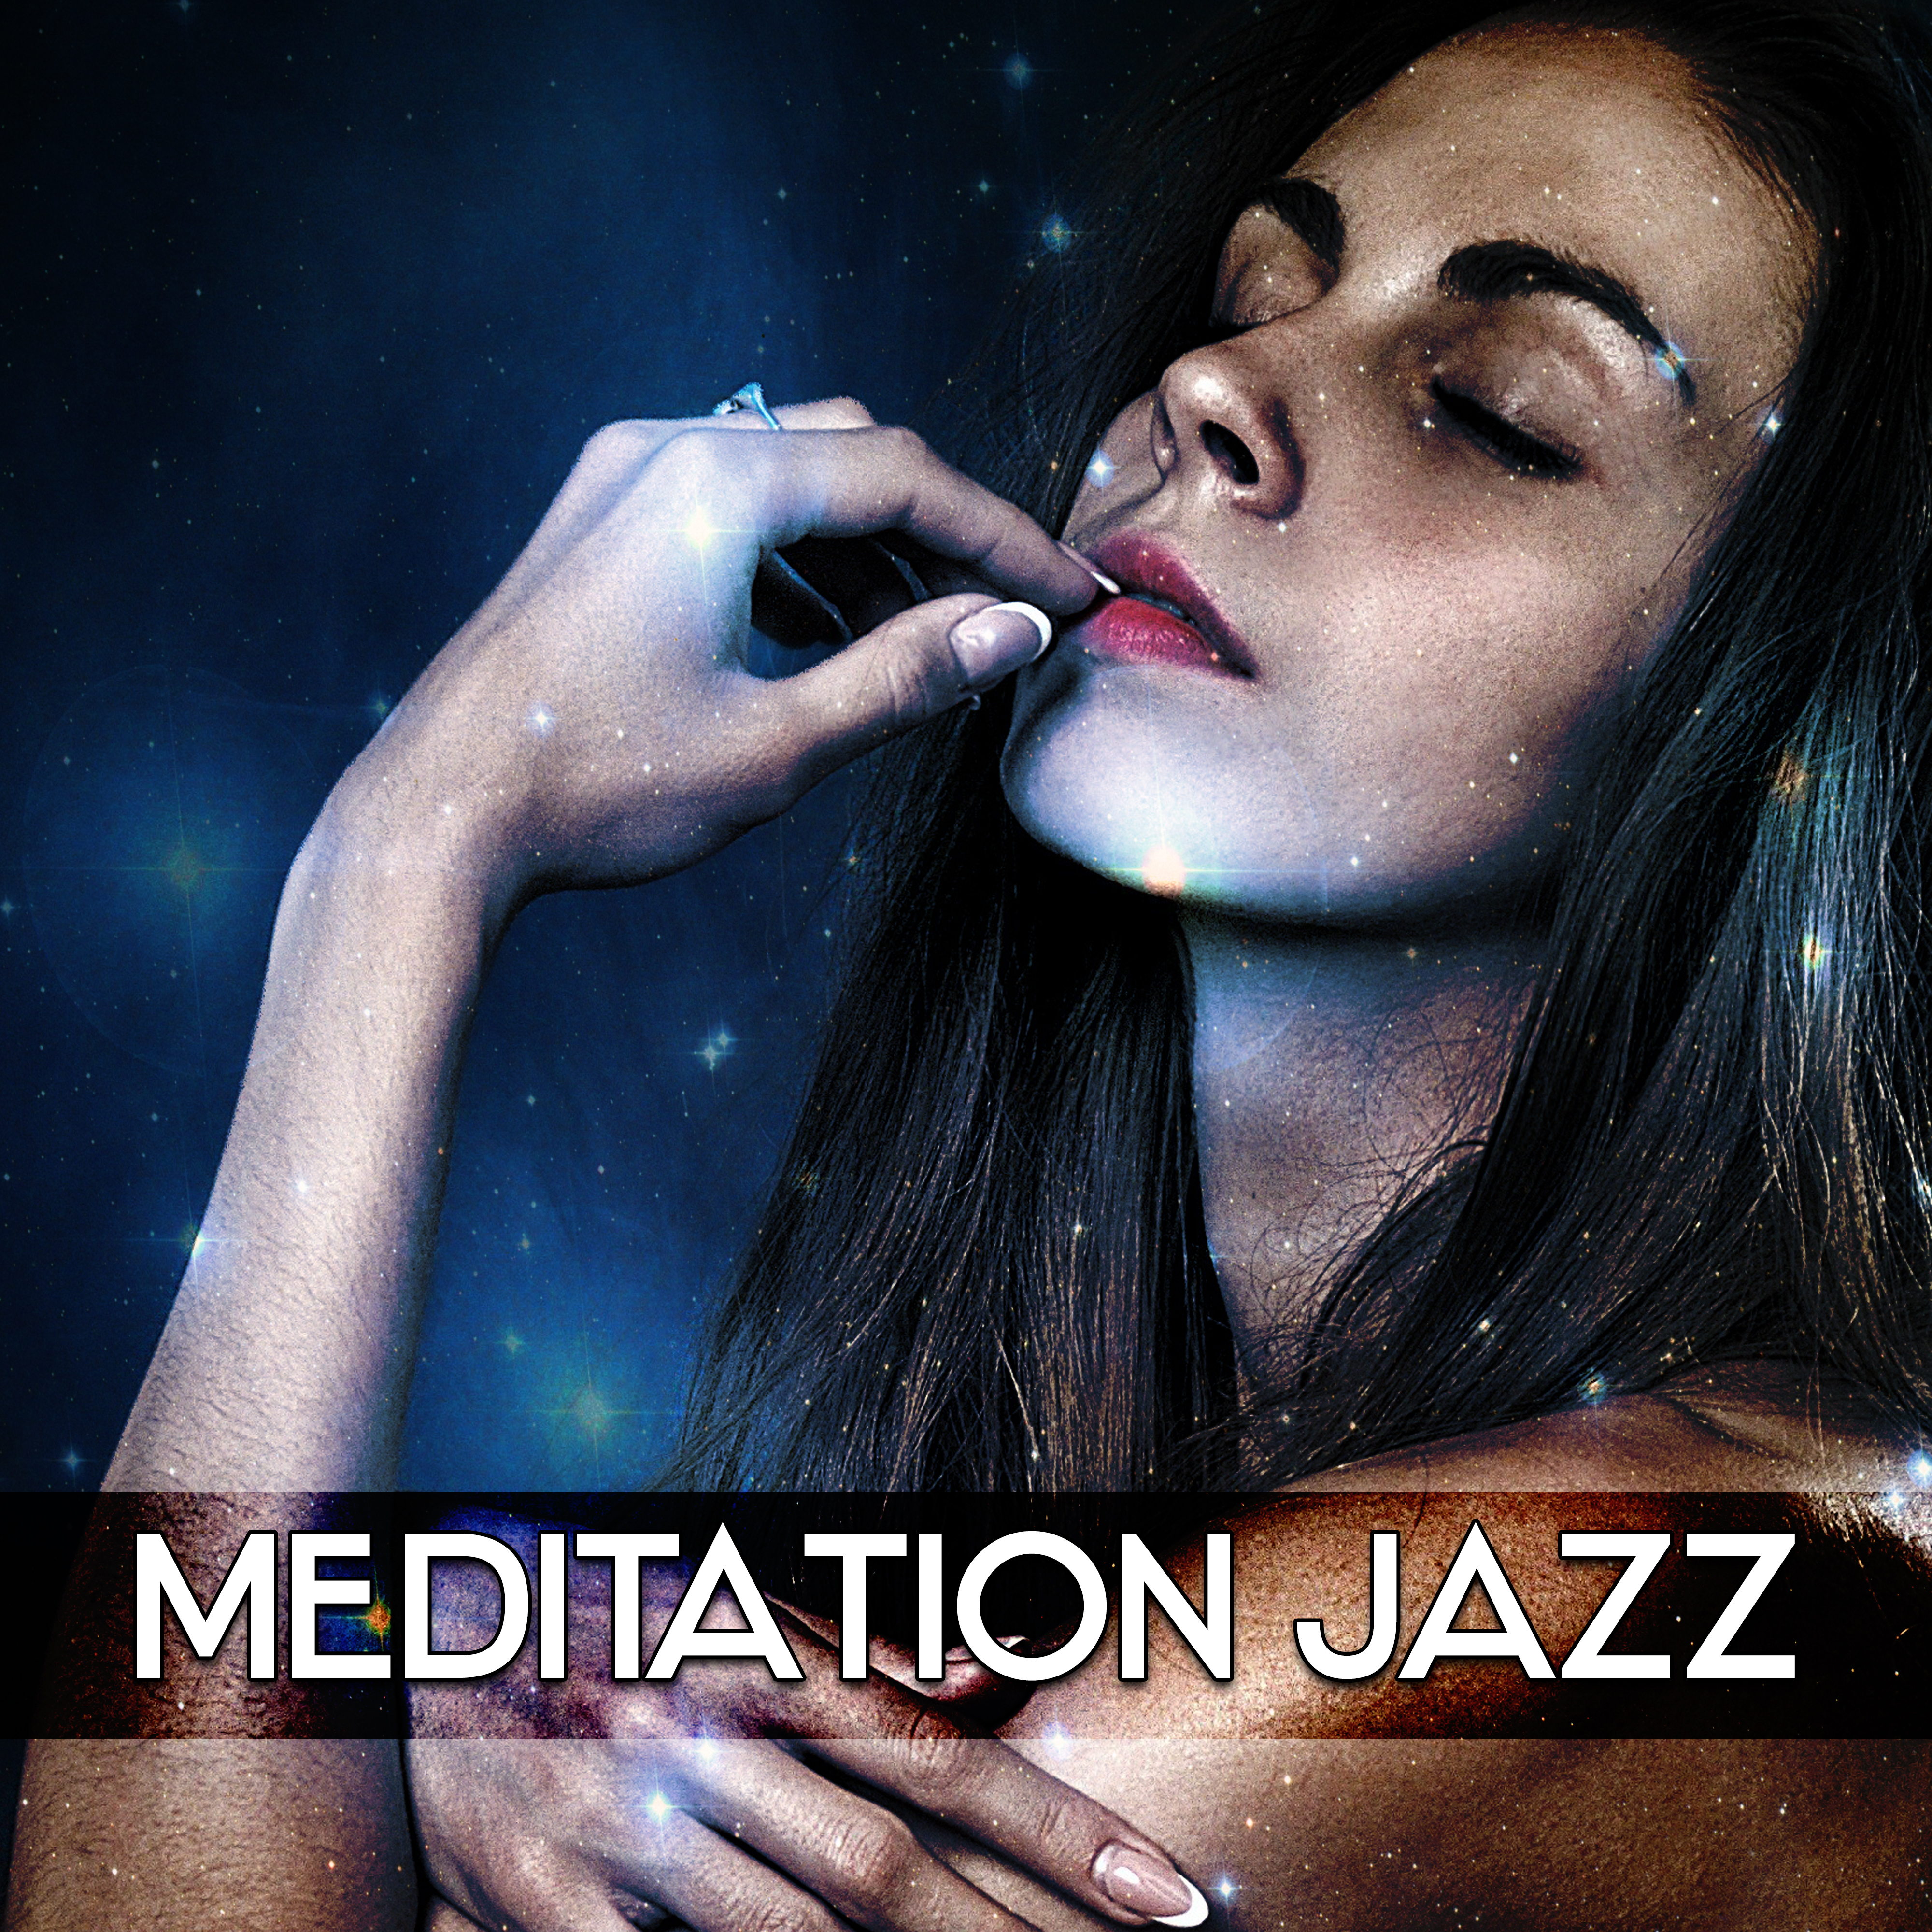 Meditation Jazz – Instrumental Jazz Music, Relaxation Sounds, Sentimental Melodies, Piano Music, Songs at Night